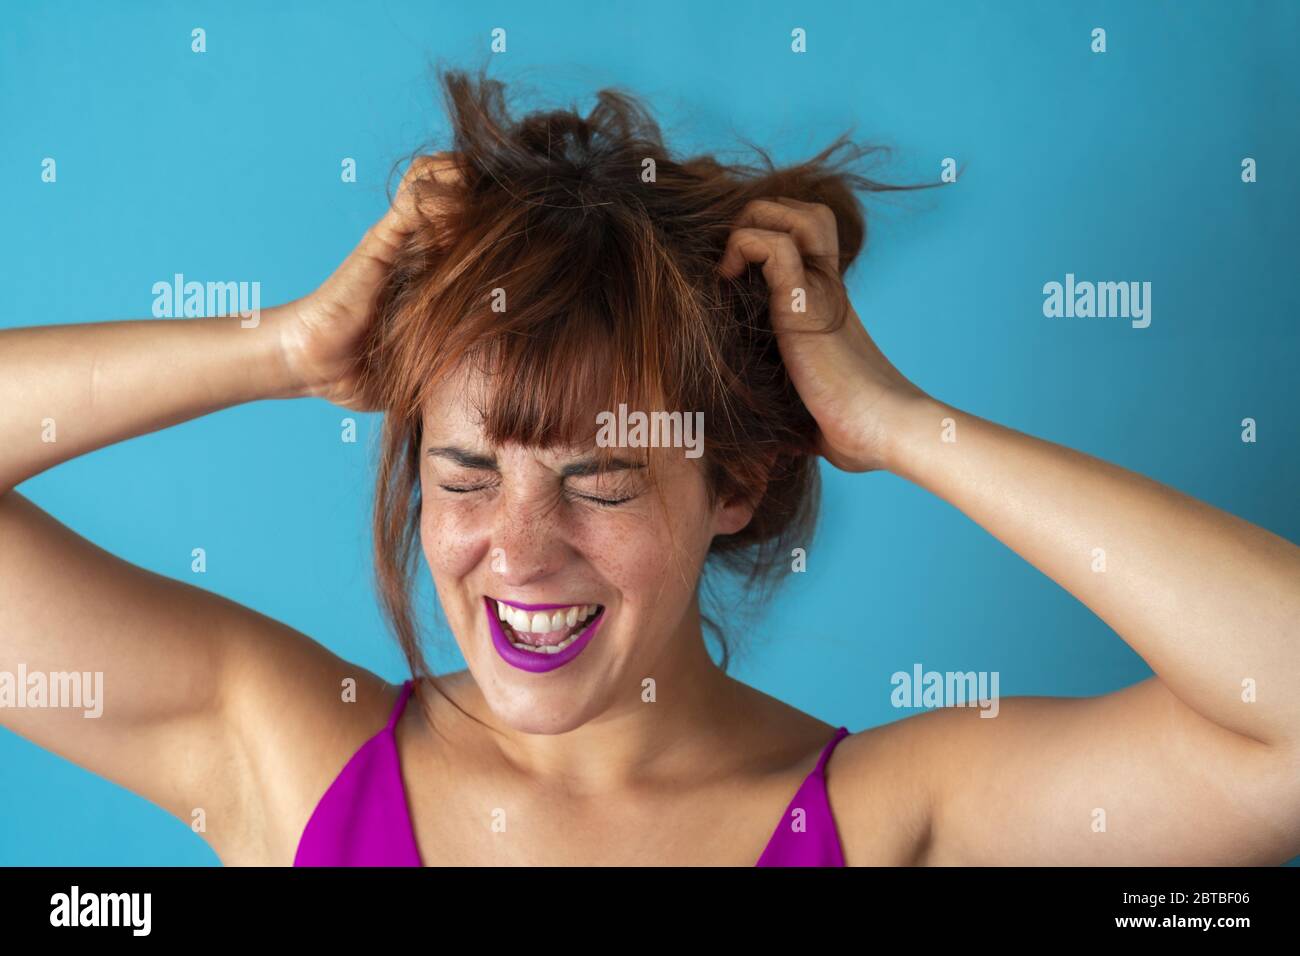 Stressed young woman pulling her hair while screaming Stock Photo